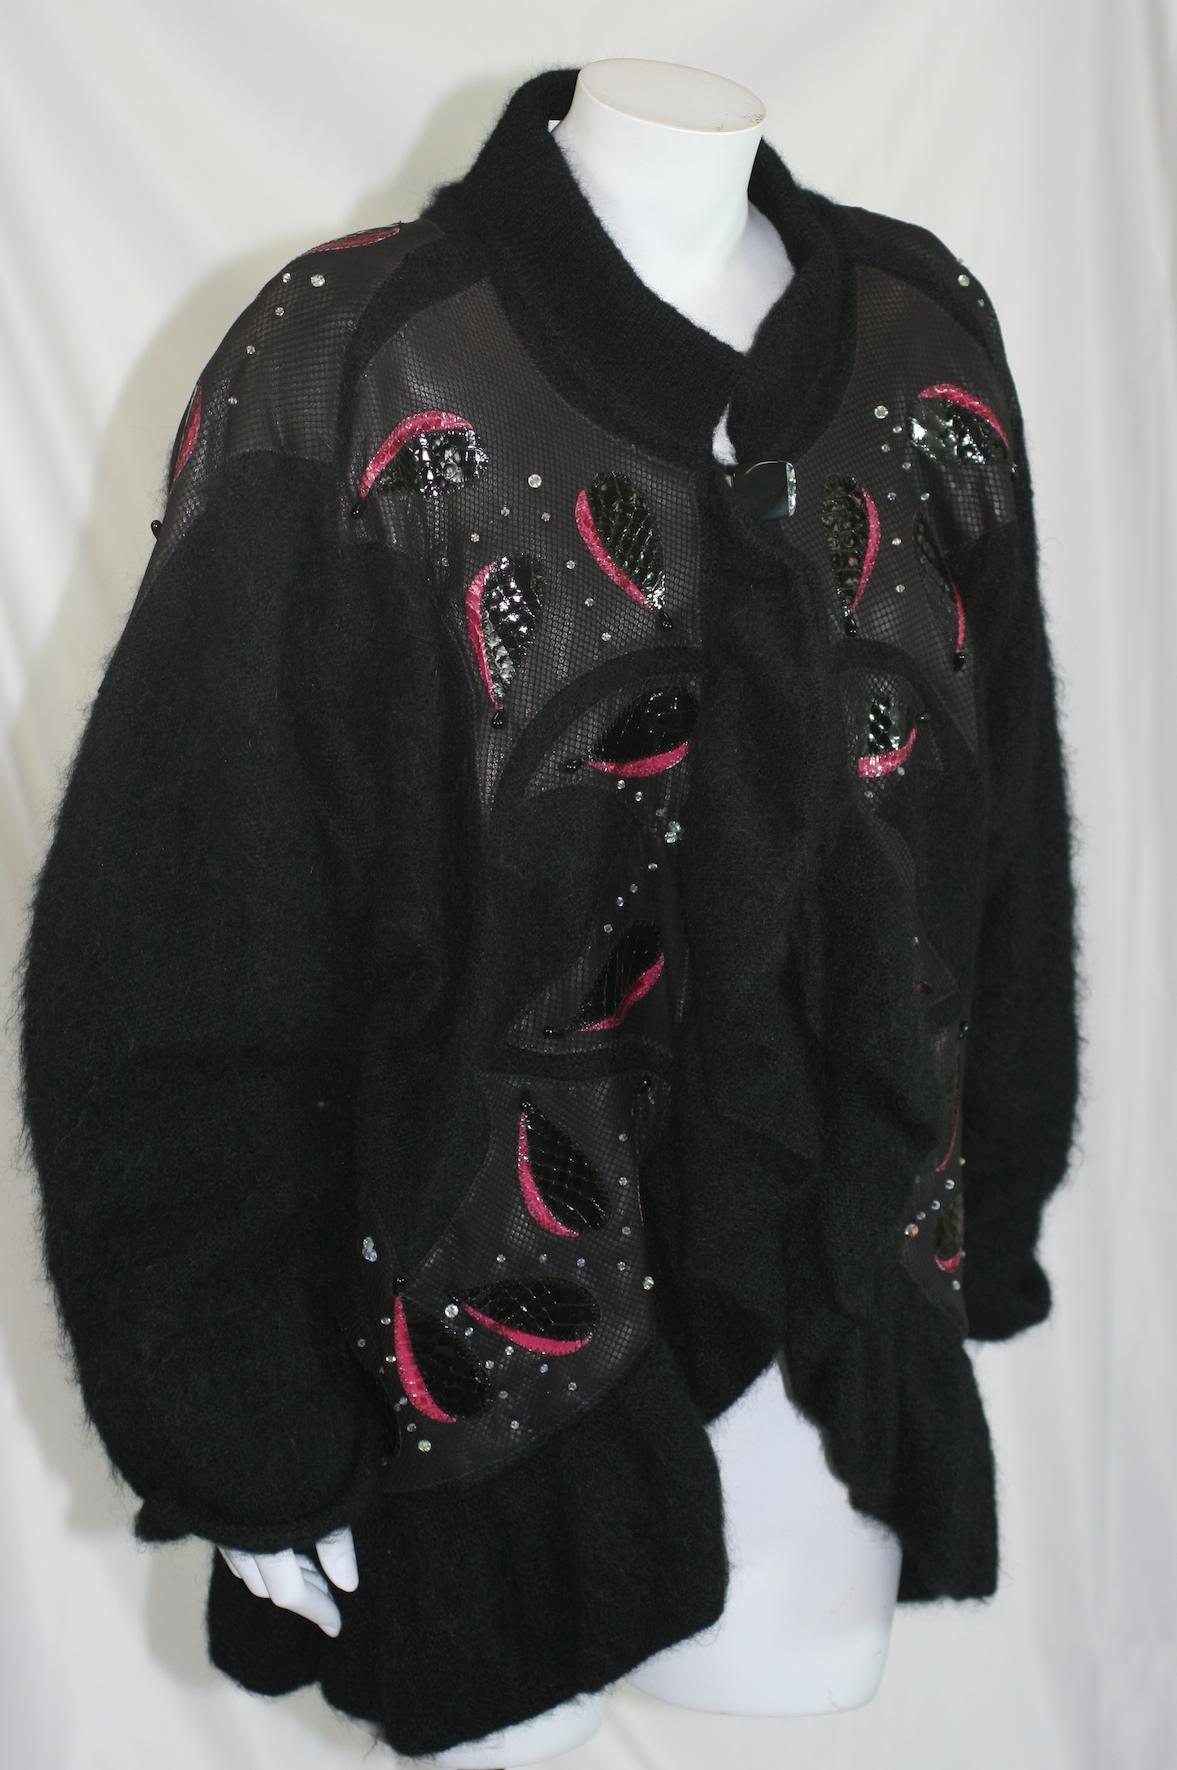 Artisan Mohair and Snakeskin Sweater Jacket. Made in the UK, in mixed materials such as reptile patterned lambskin applique and snakeskin leaves on mohair knit base with Aurora and jet Swarovski crystal beads. Extravagant ruffle along front turns